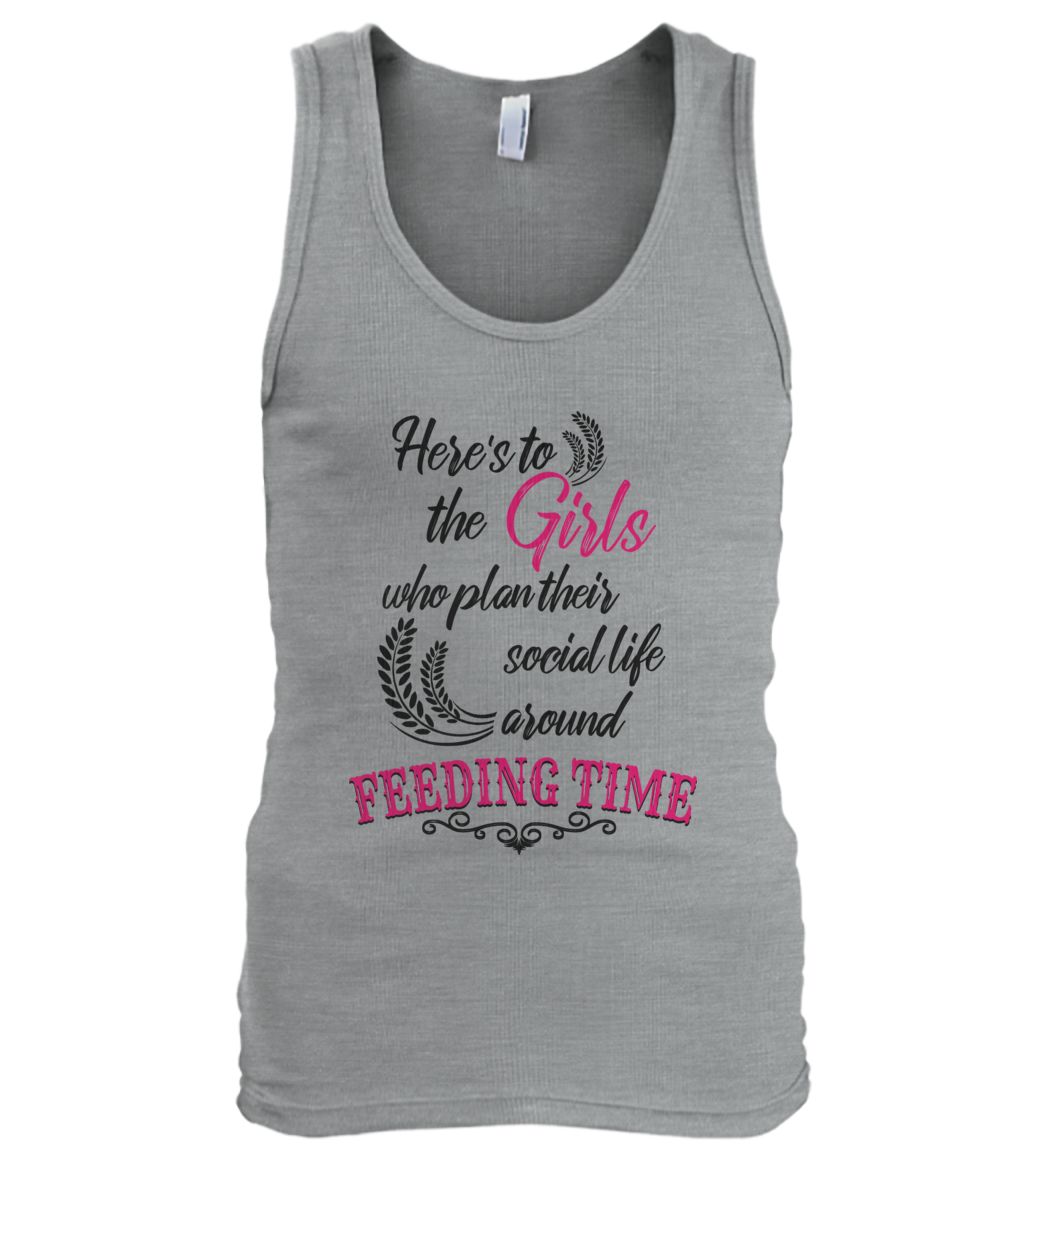 Here's to the girls who plan their social life around feeding time farmer men's tank top